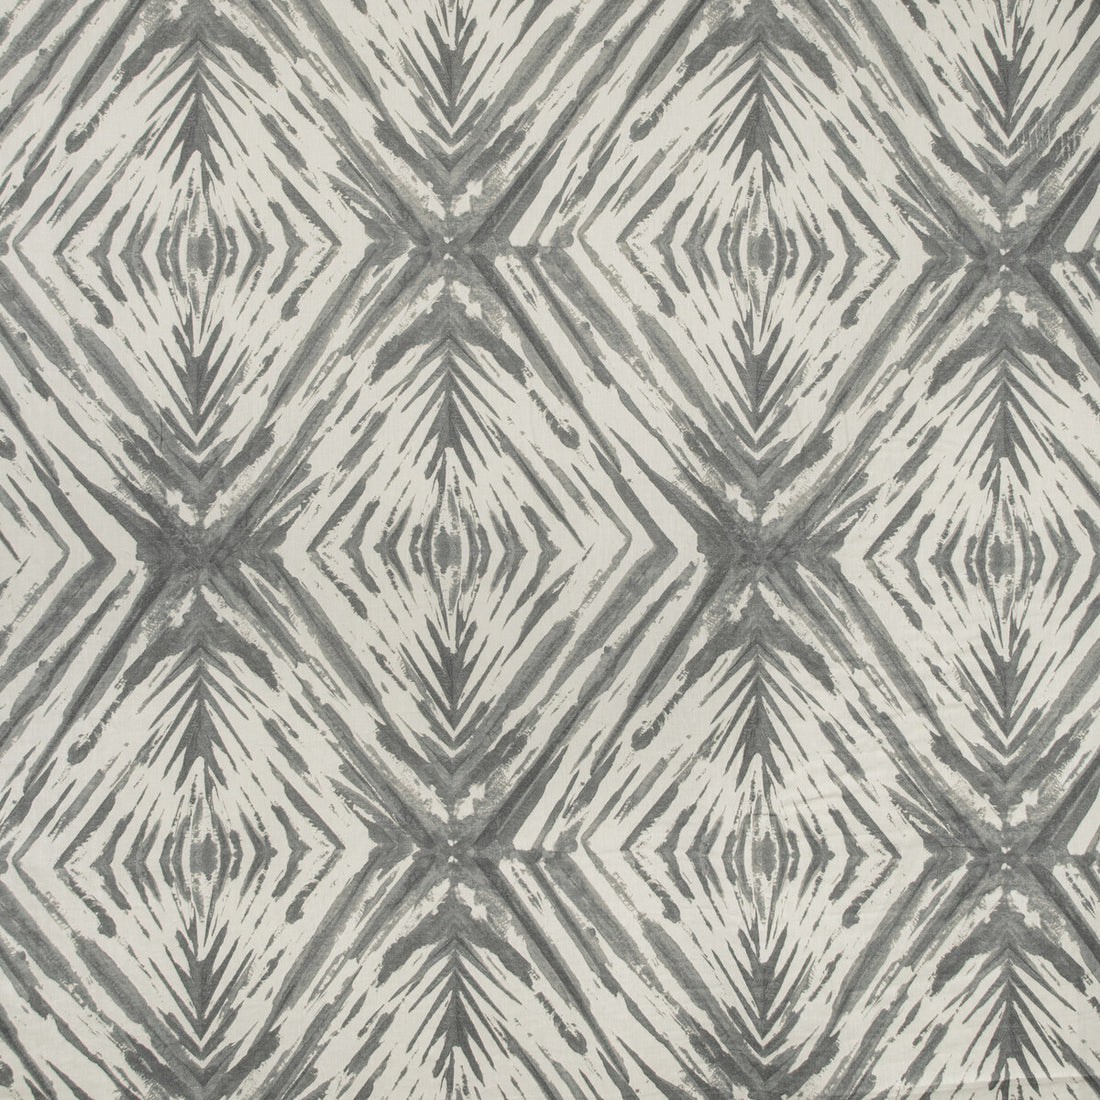 Island Dye fabric in platinum color - pattern ISLAND DYE.11.0 - by Kravet Couture in the Linherr Hollingsworth Boheme II collection